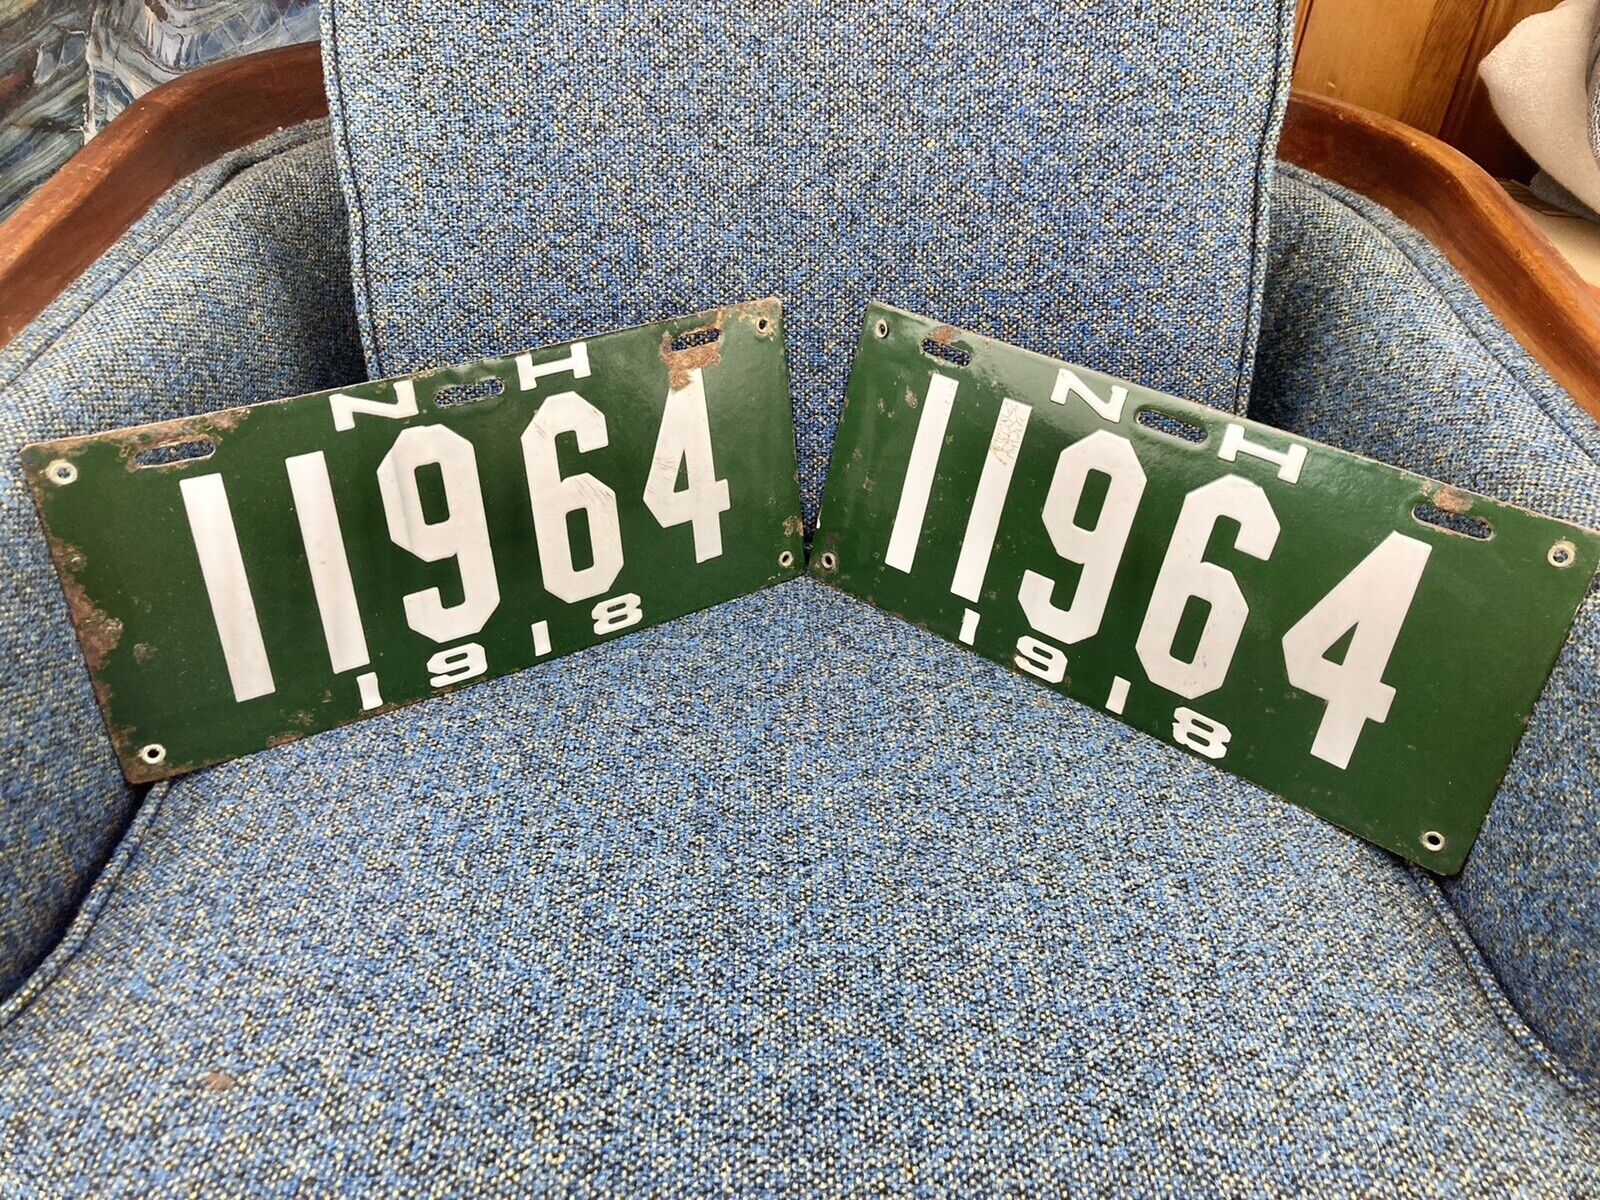 Vintage 1918 New Hampshire NH Porcelain License Plate Matching Set Green/White